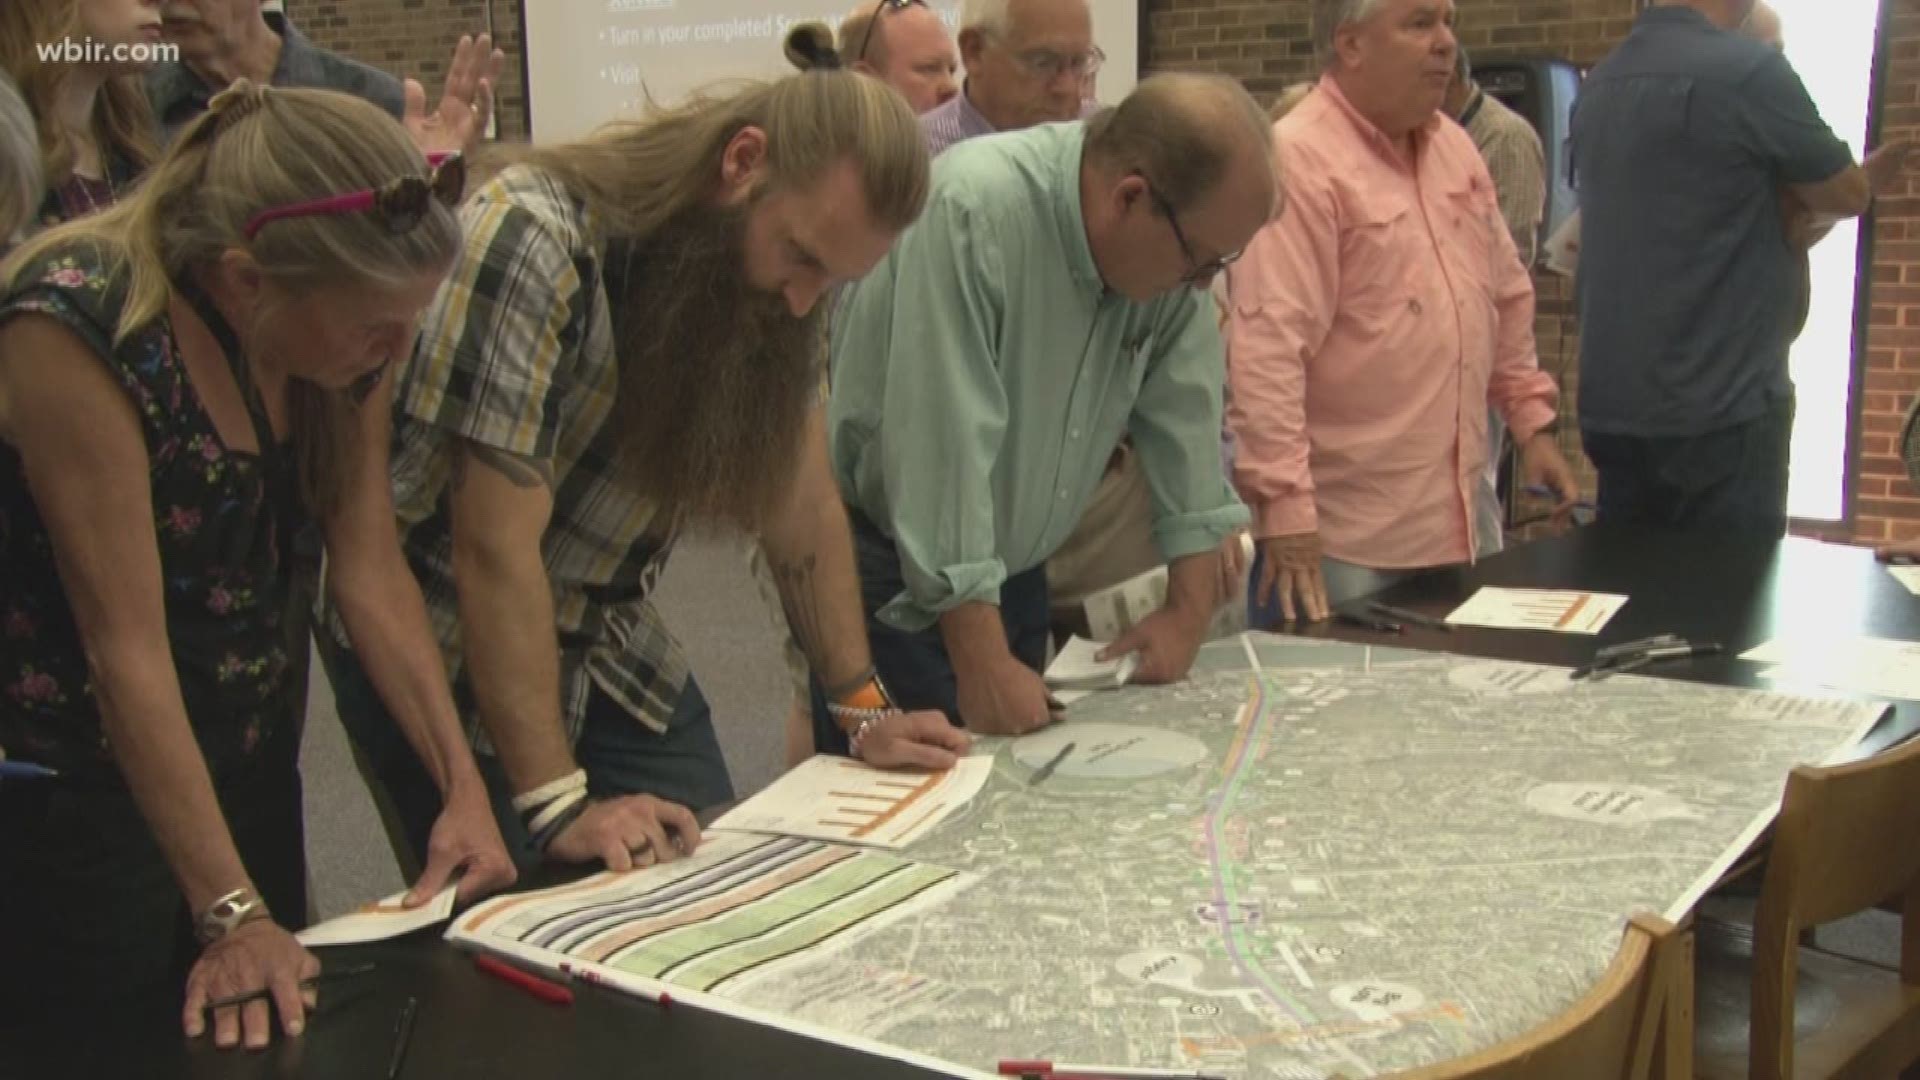 Dozens of ideas about how to improve Chapman Highway came pouring in to the Knoxville Planning Commission Tuesday night.